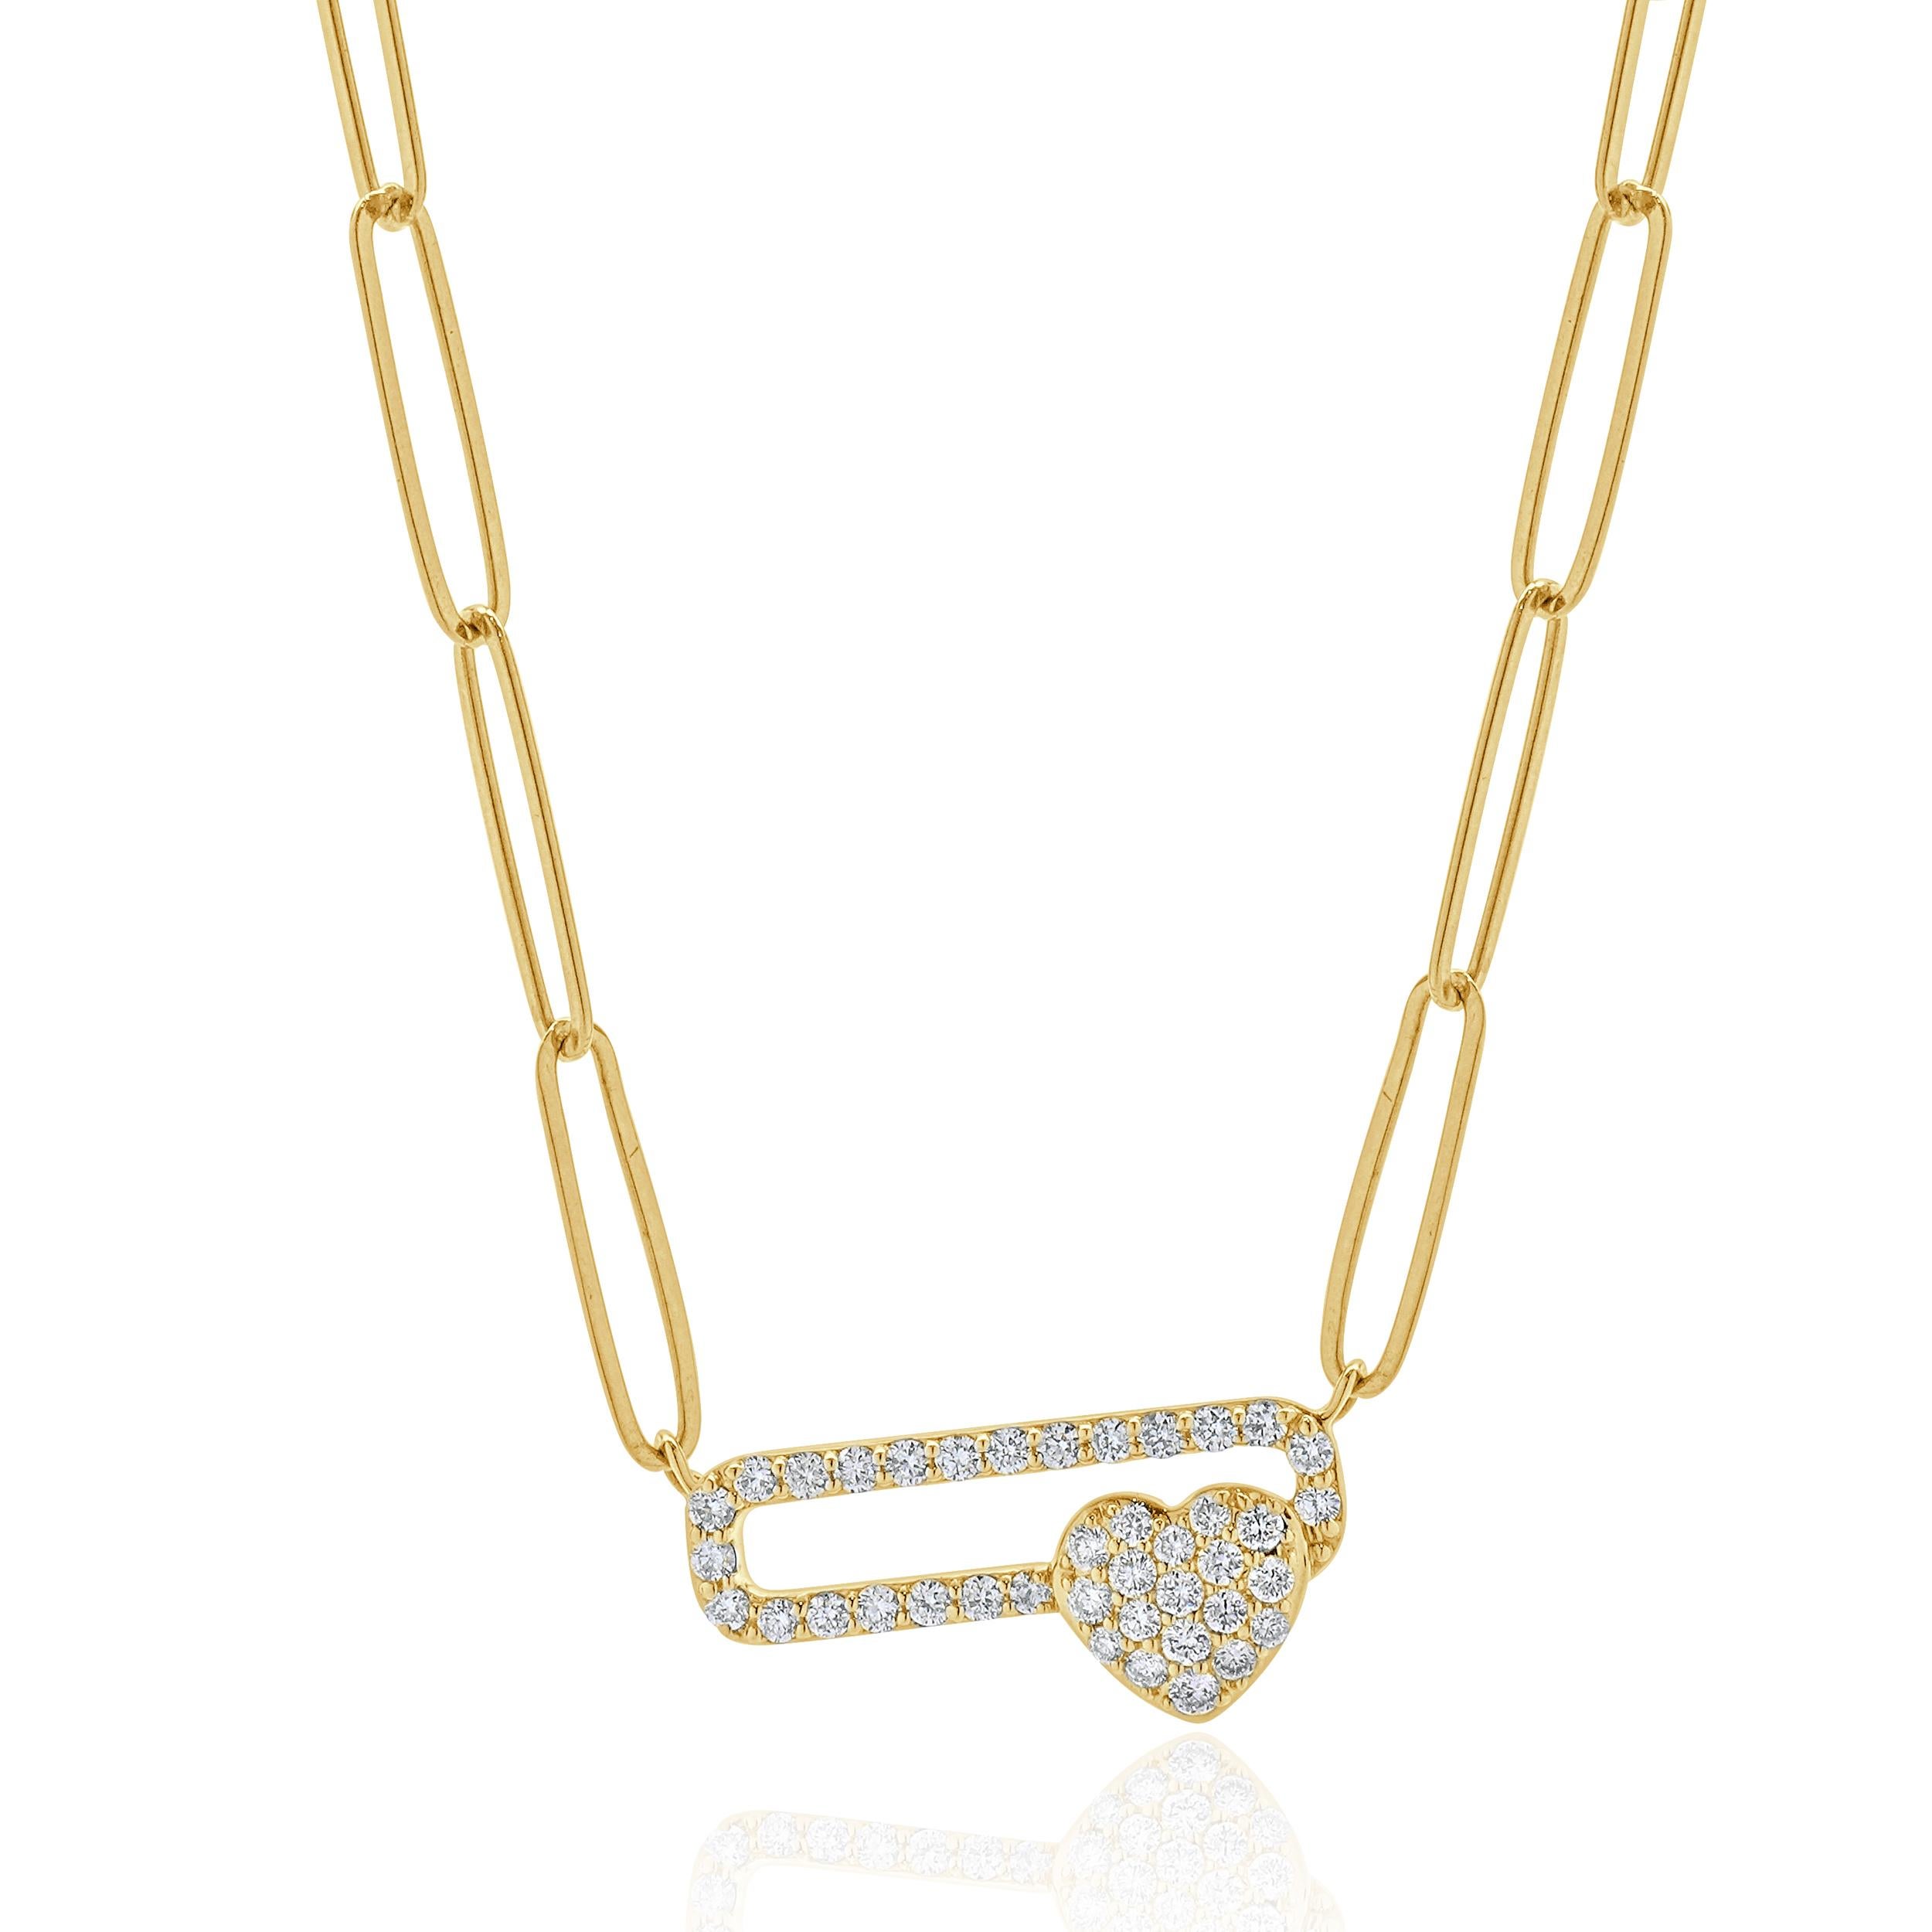 Designer: custom
Material: 14K yellow gold
Diamonds: 40 round brilliant Diamonds= 0.22cttw
Color: G-H
Clarity:VS-SI1
Dimensions: necklace measures 18-inches in length 
Weight: 3.85 grams
